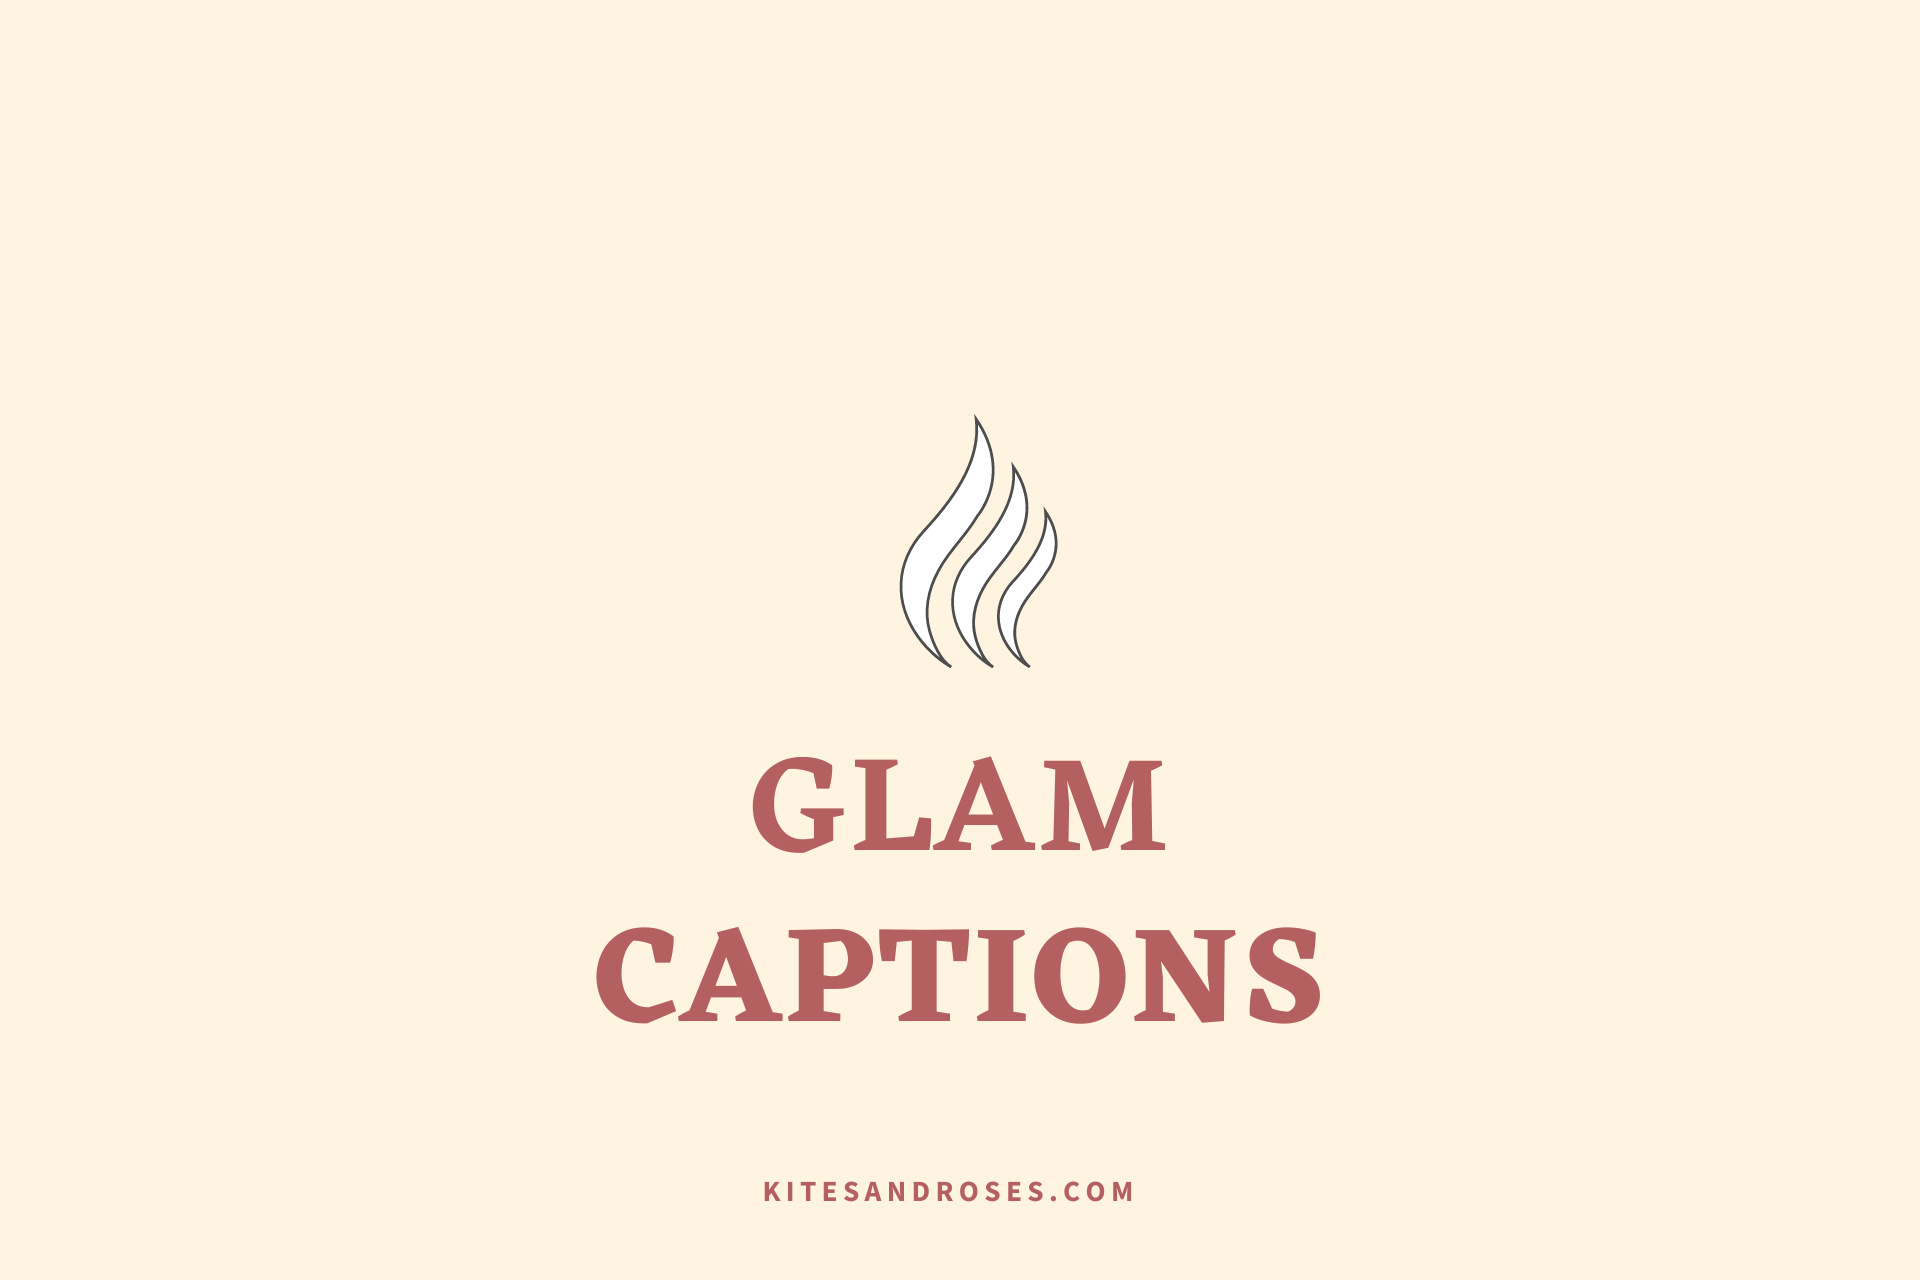 Glamour Porn Captions - 27+ Glam Captions For Instagram [With Quotes] - Kites and Roses